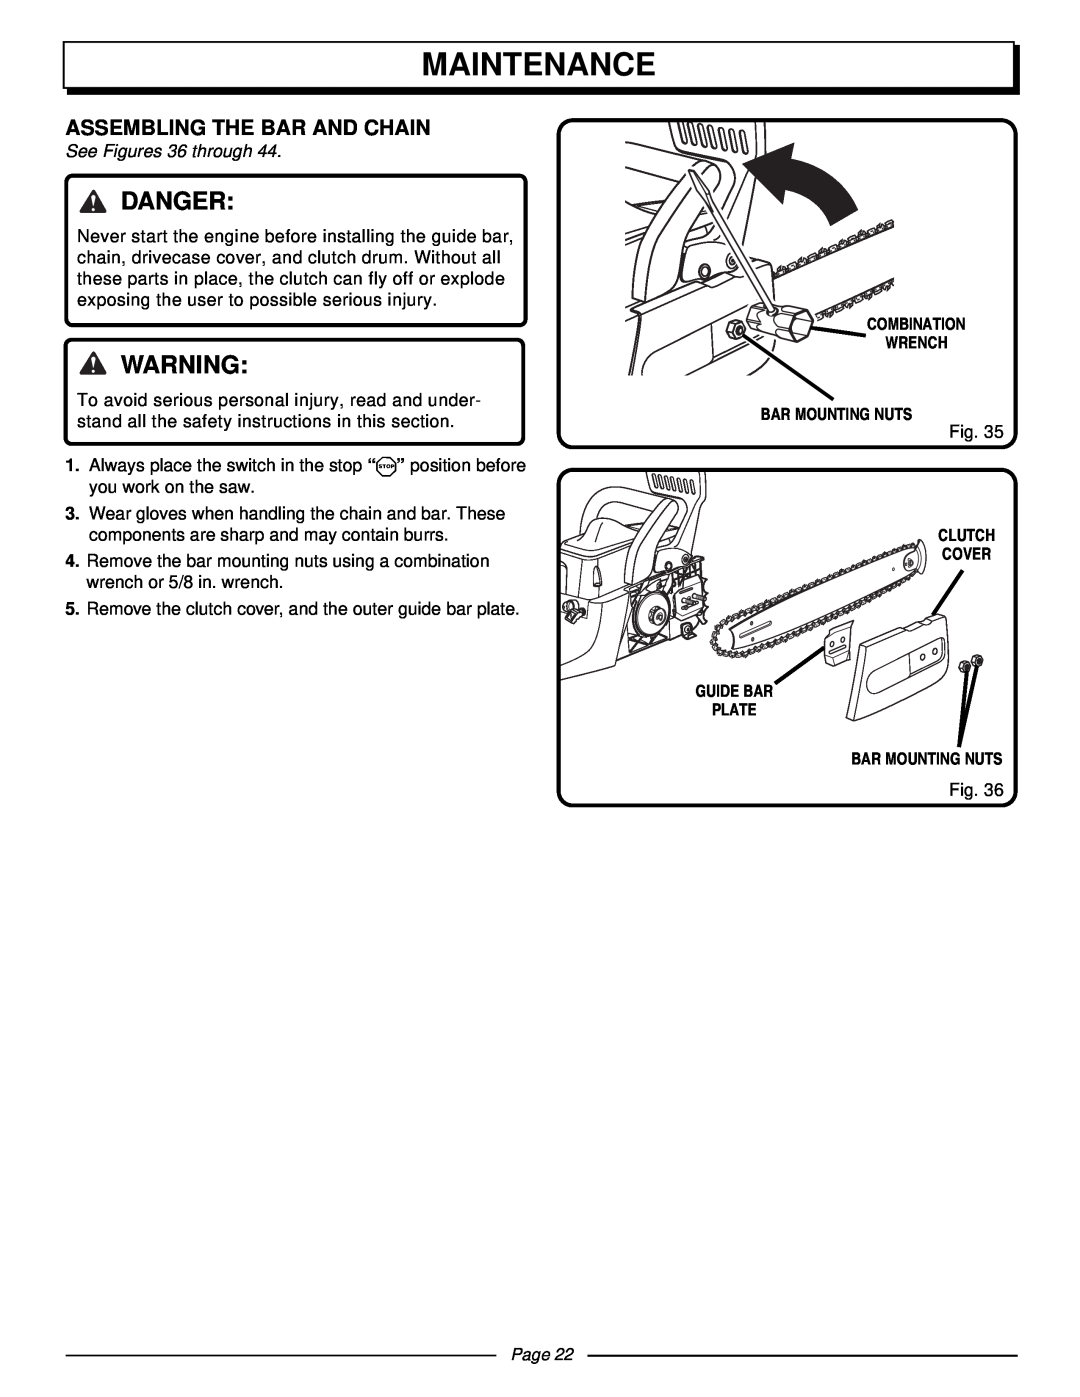 Homelite UT10510 manual Maintenance, Danger, Assembling The Bar And Chain, See Figures 36 through, Page 